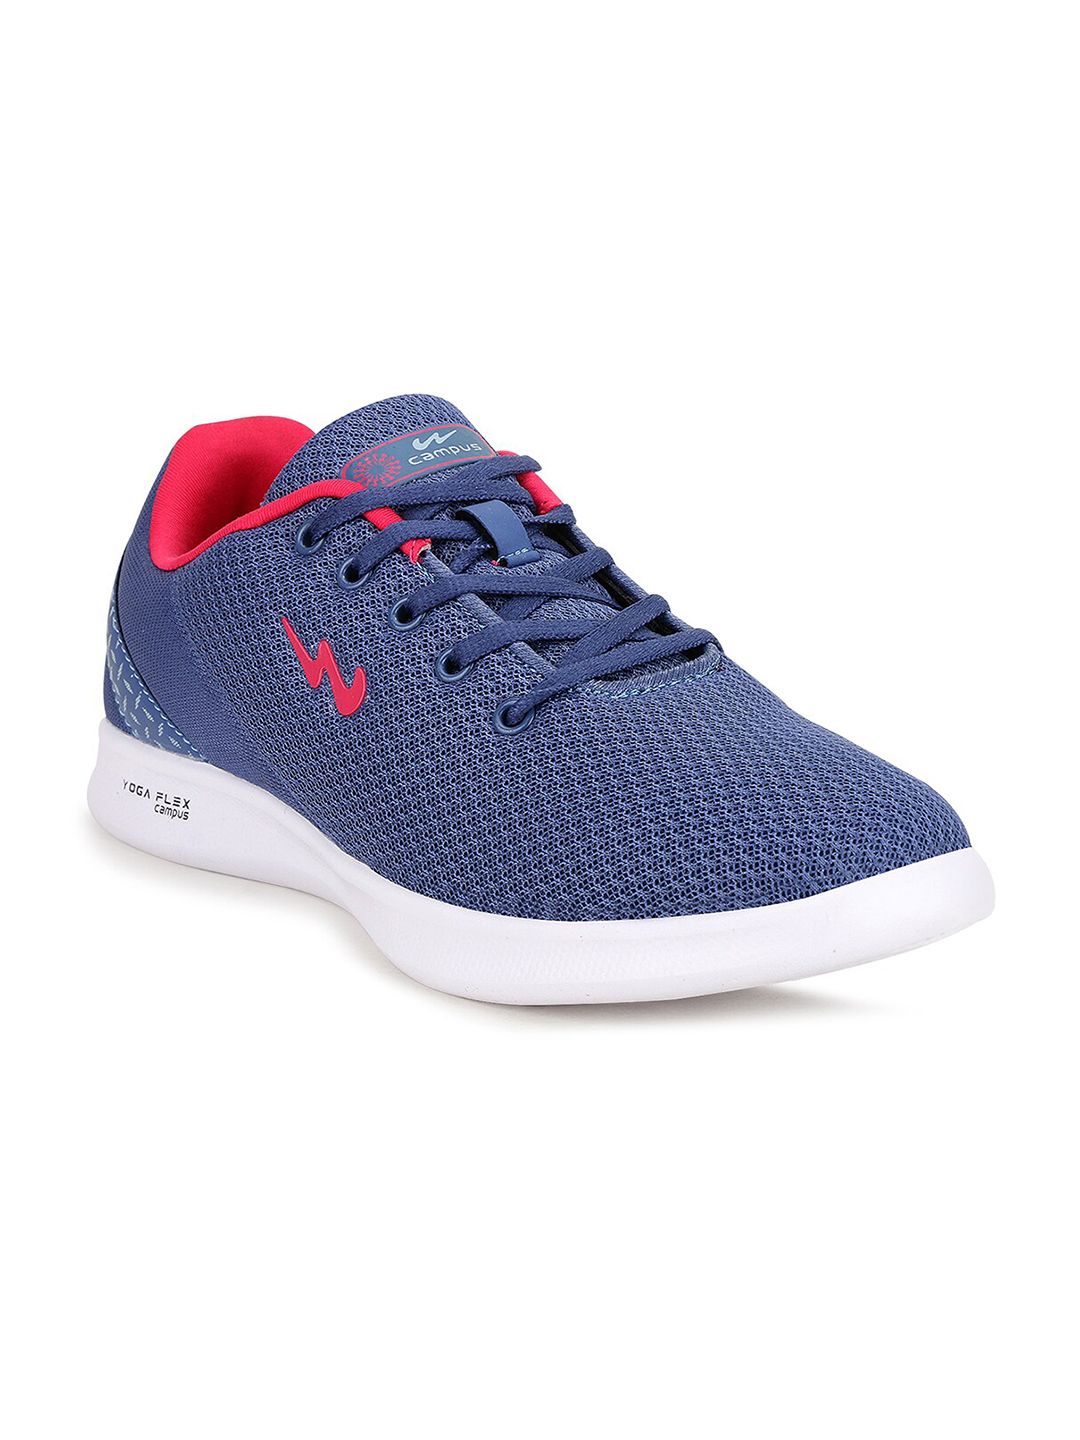 Campus Women Blue Mesh Running Marking Shoes Price in India